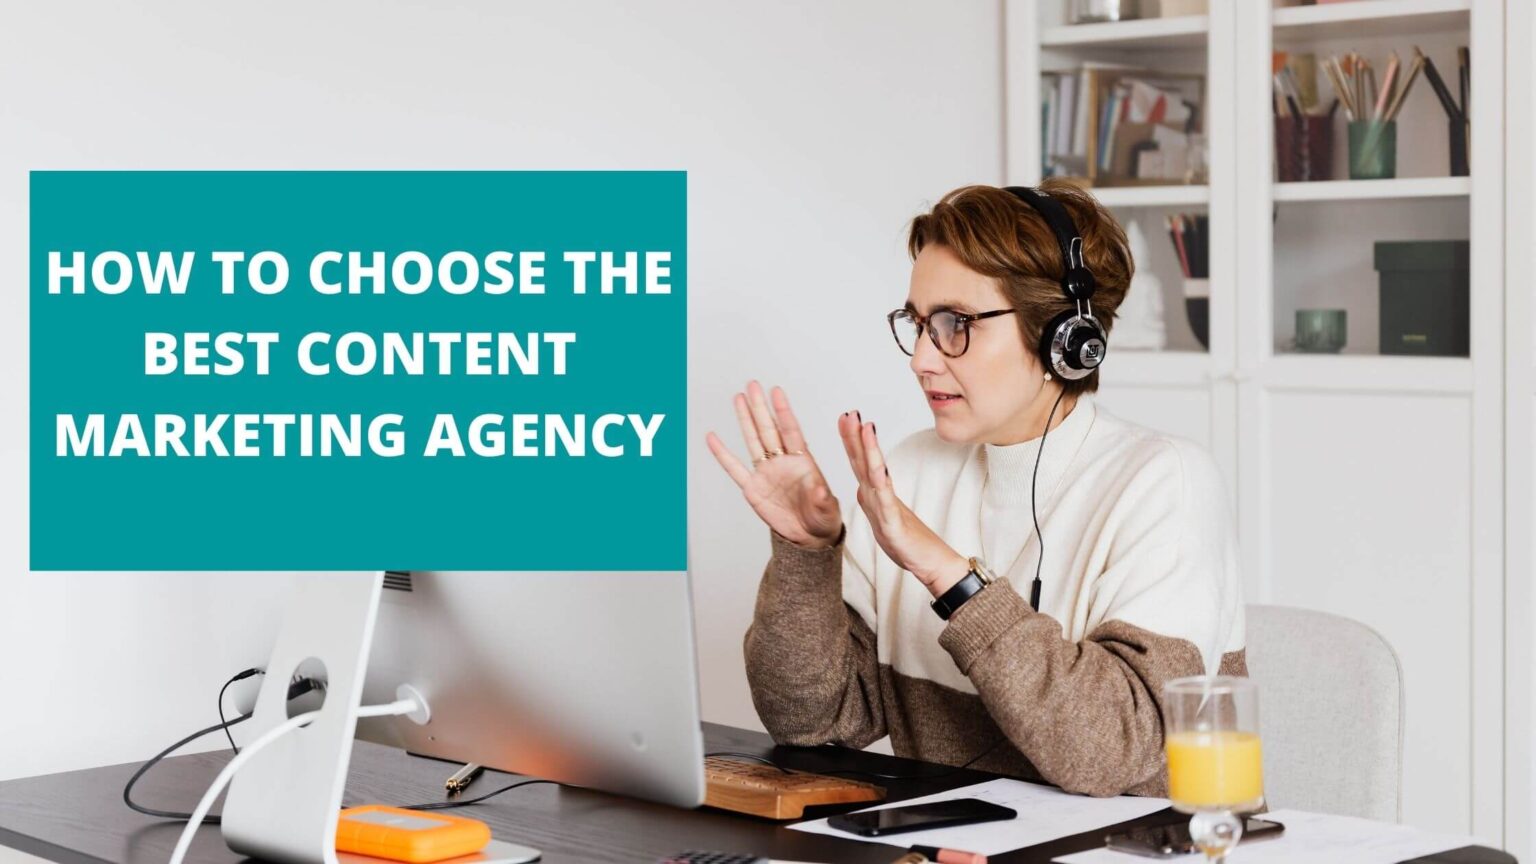 How To Choose The Best Content Marketing Agency For Your Business